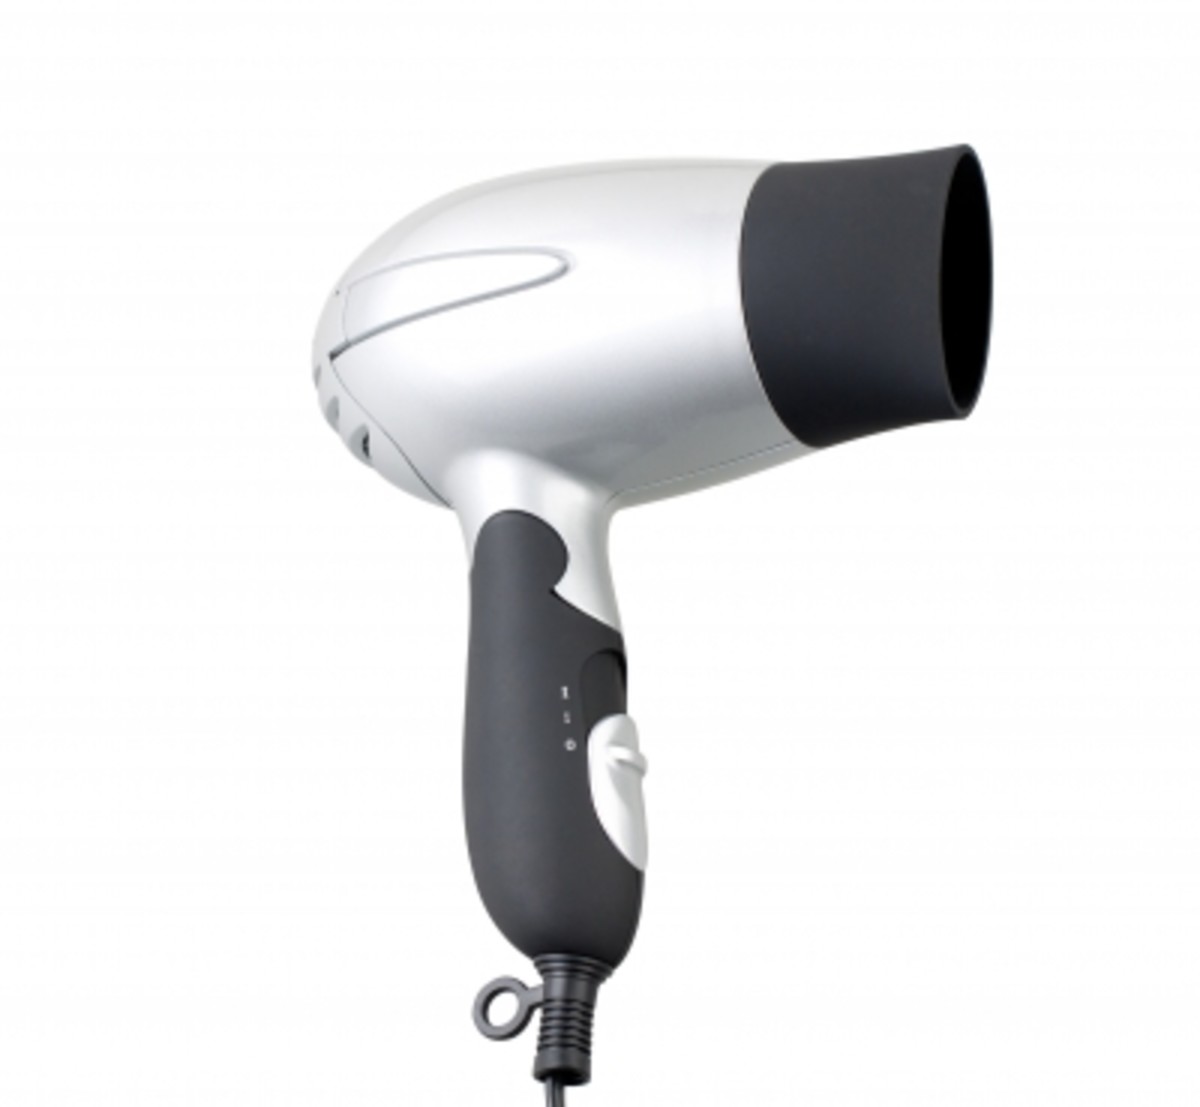 Blowing hot air from a hair dryer before going to bed can help you start your night with warm sheets.